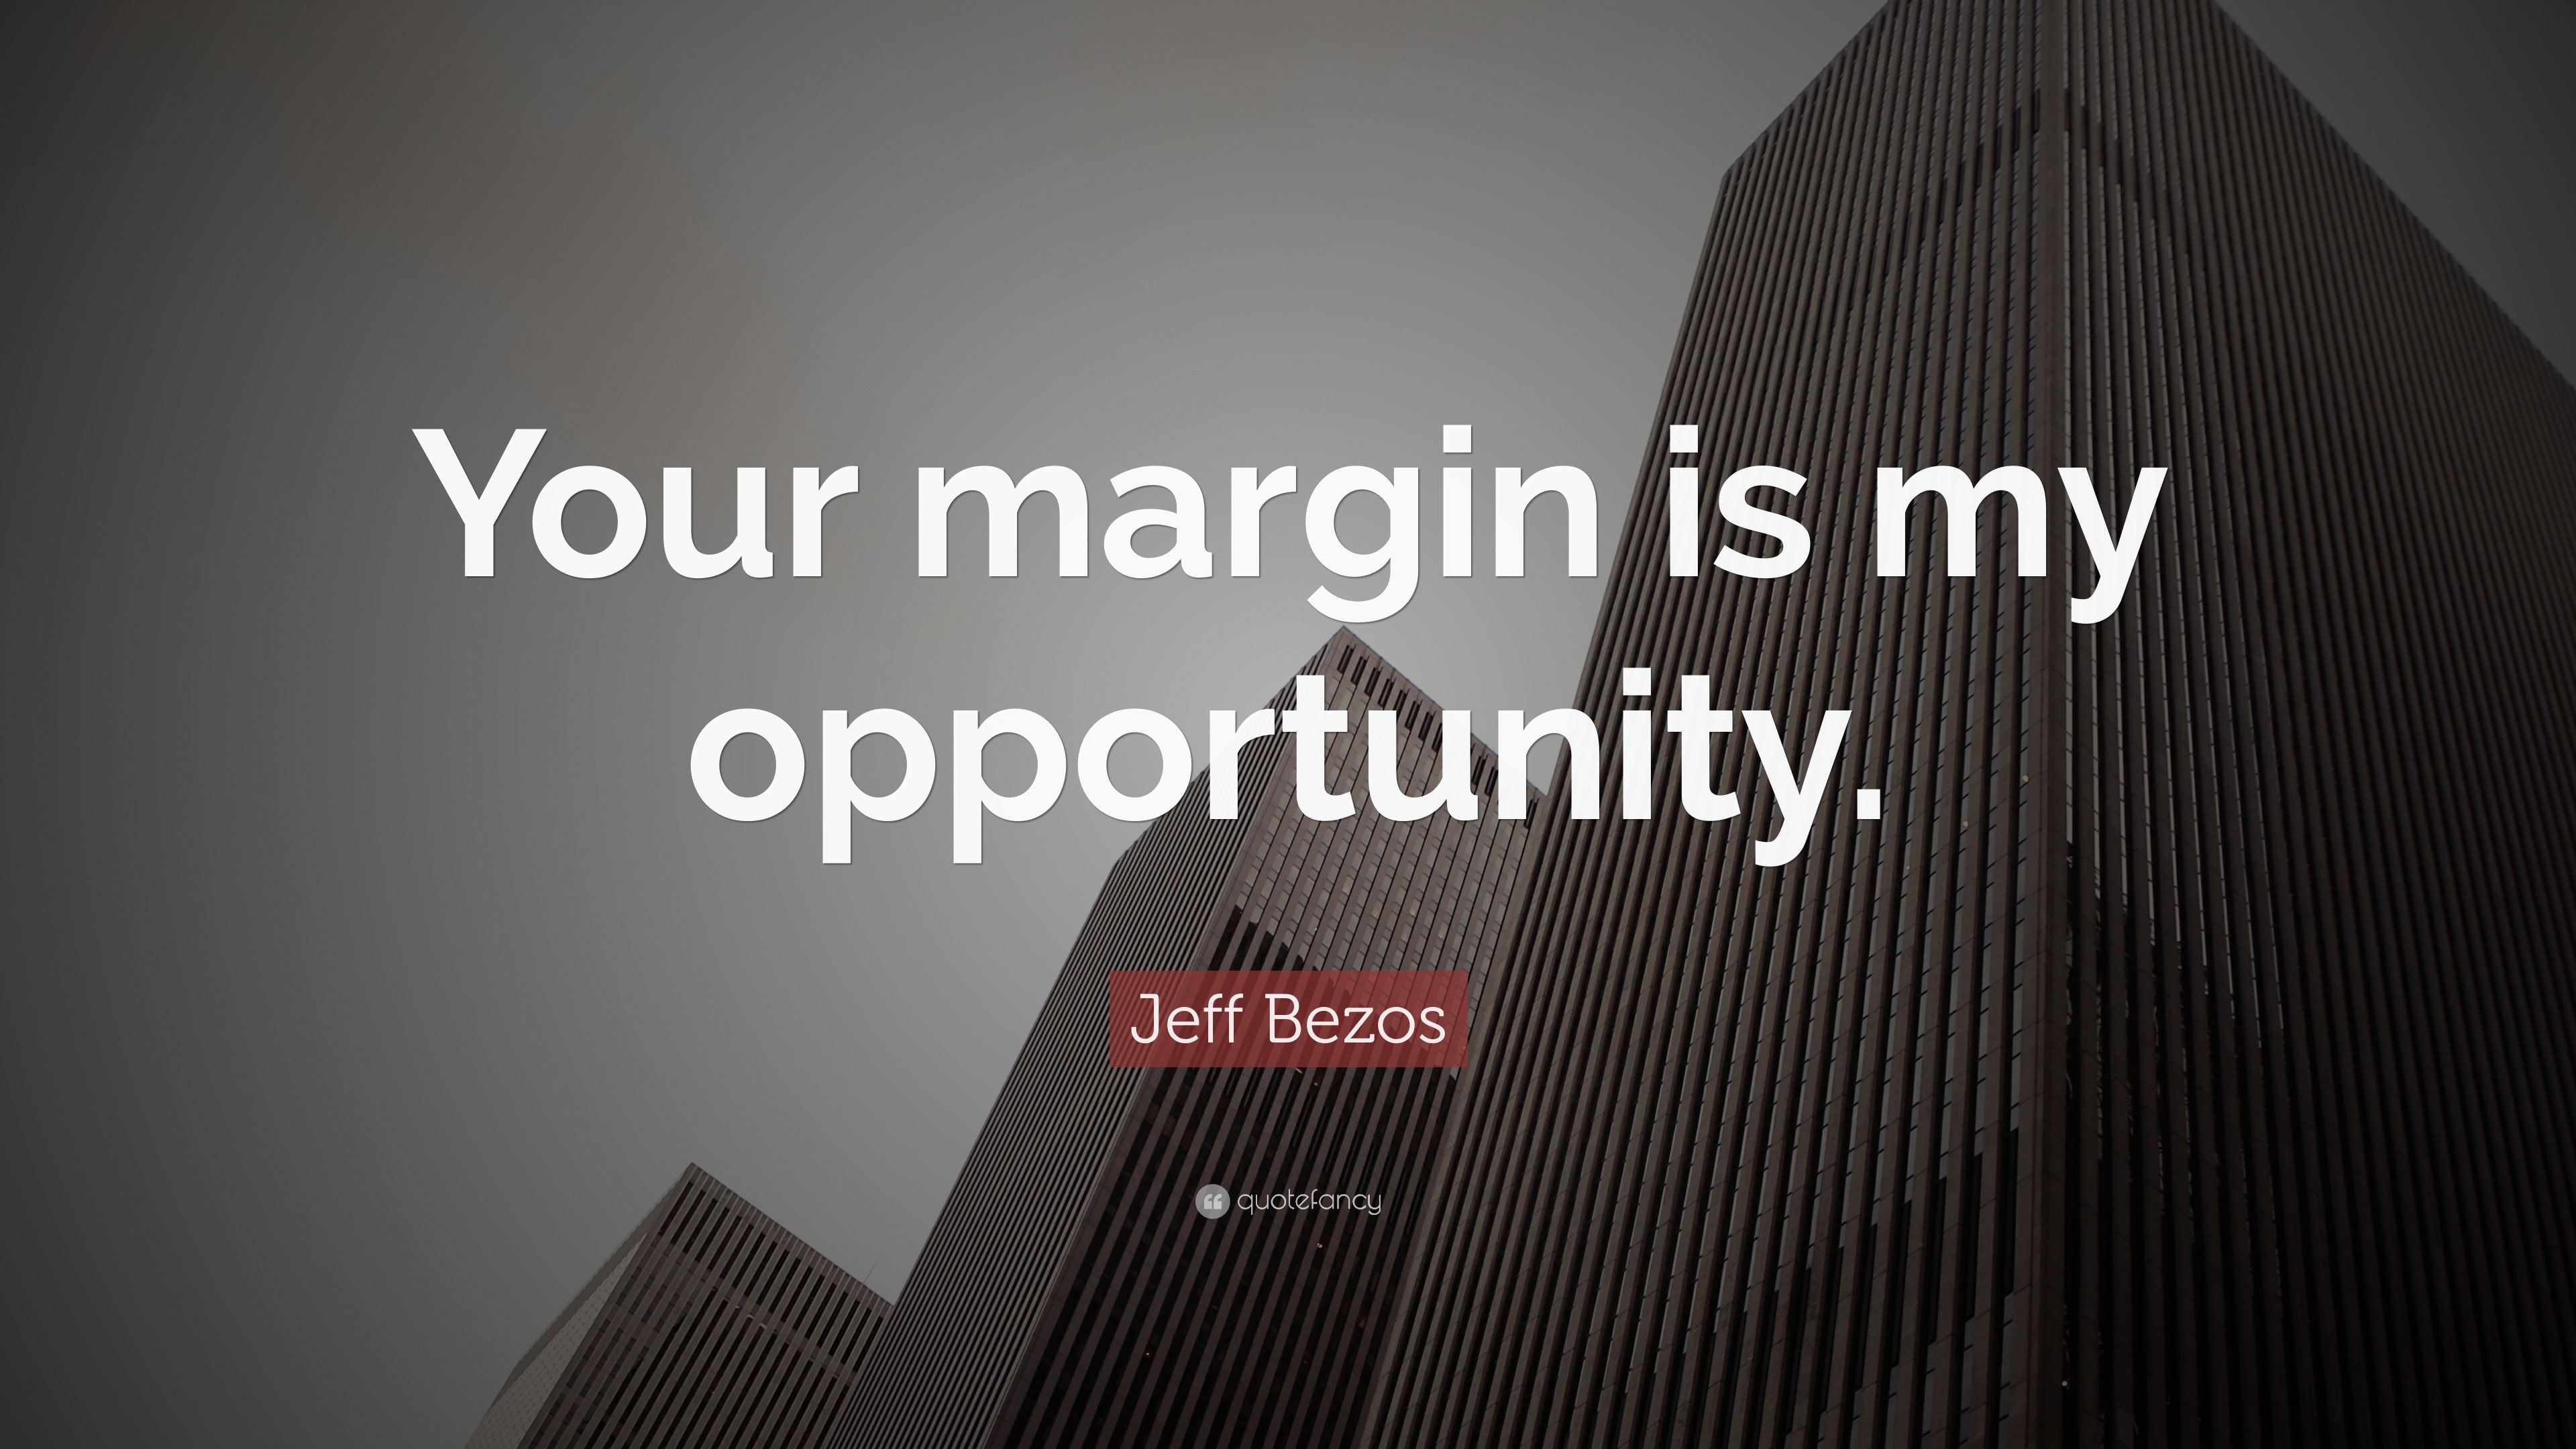 "your margin is my opportunity.